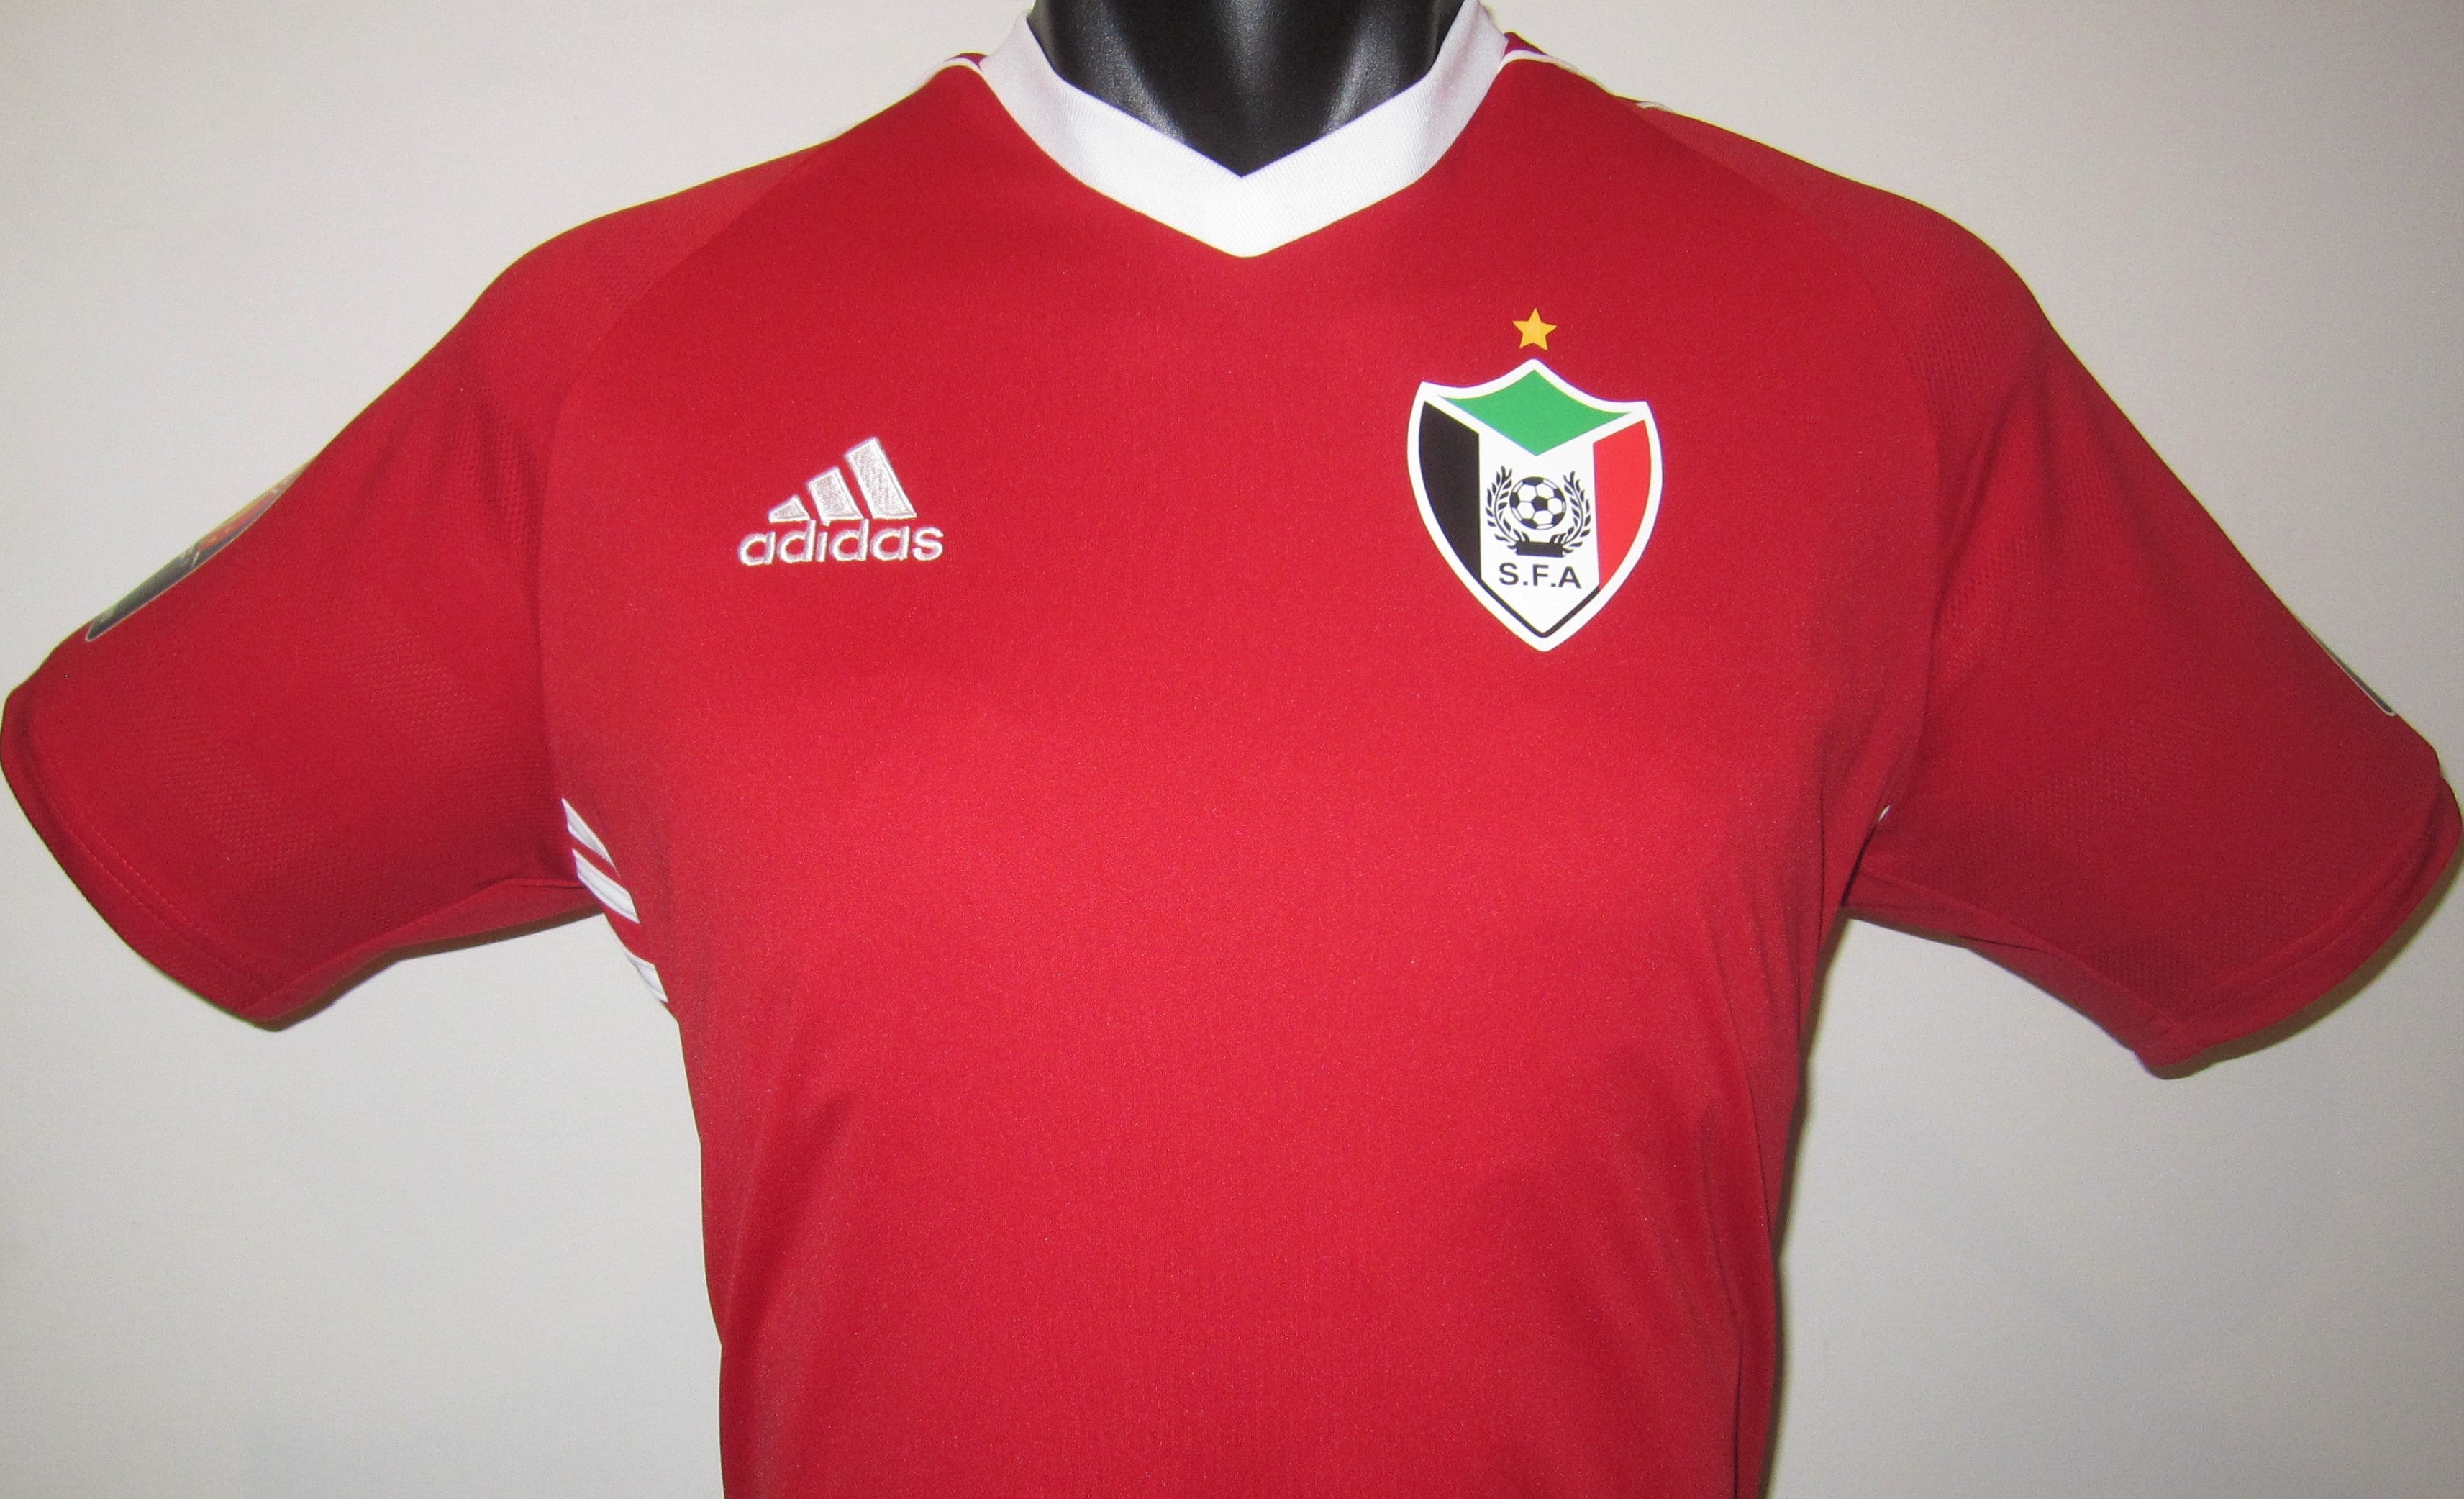 Sudan AFCON 2021 Home Jersey/Shirt